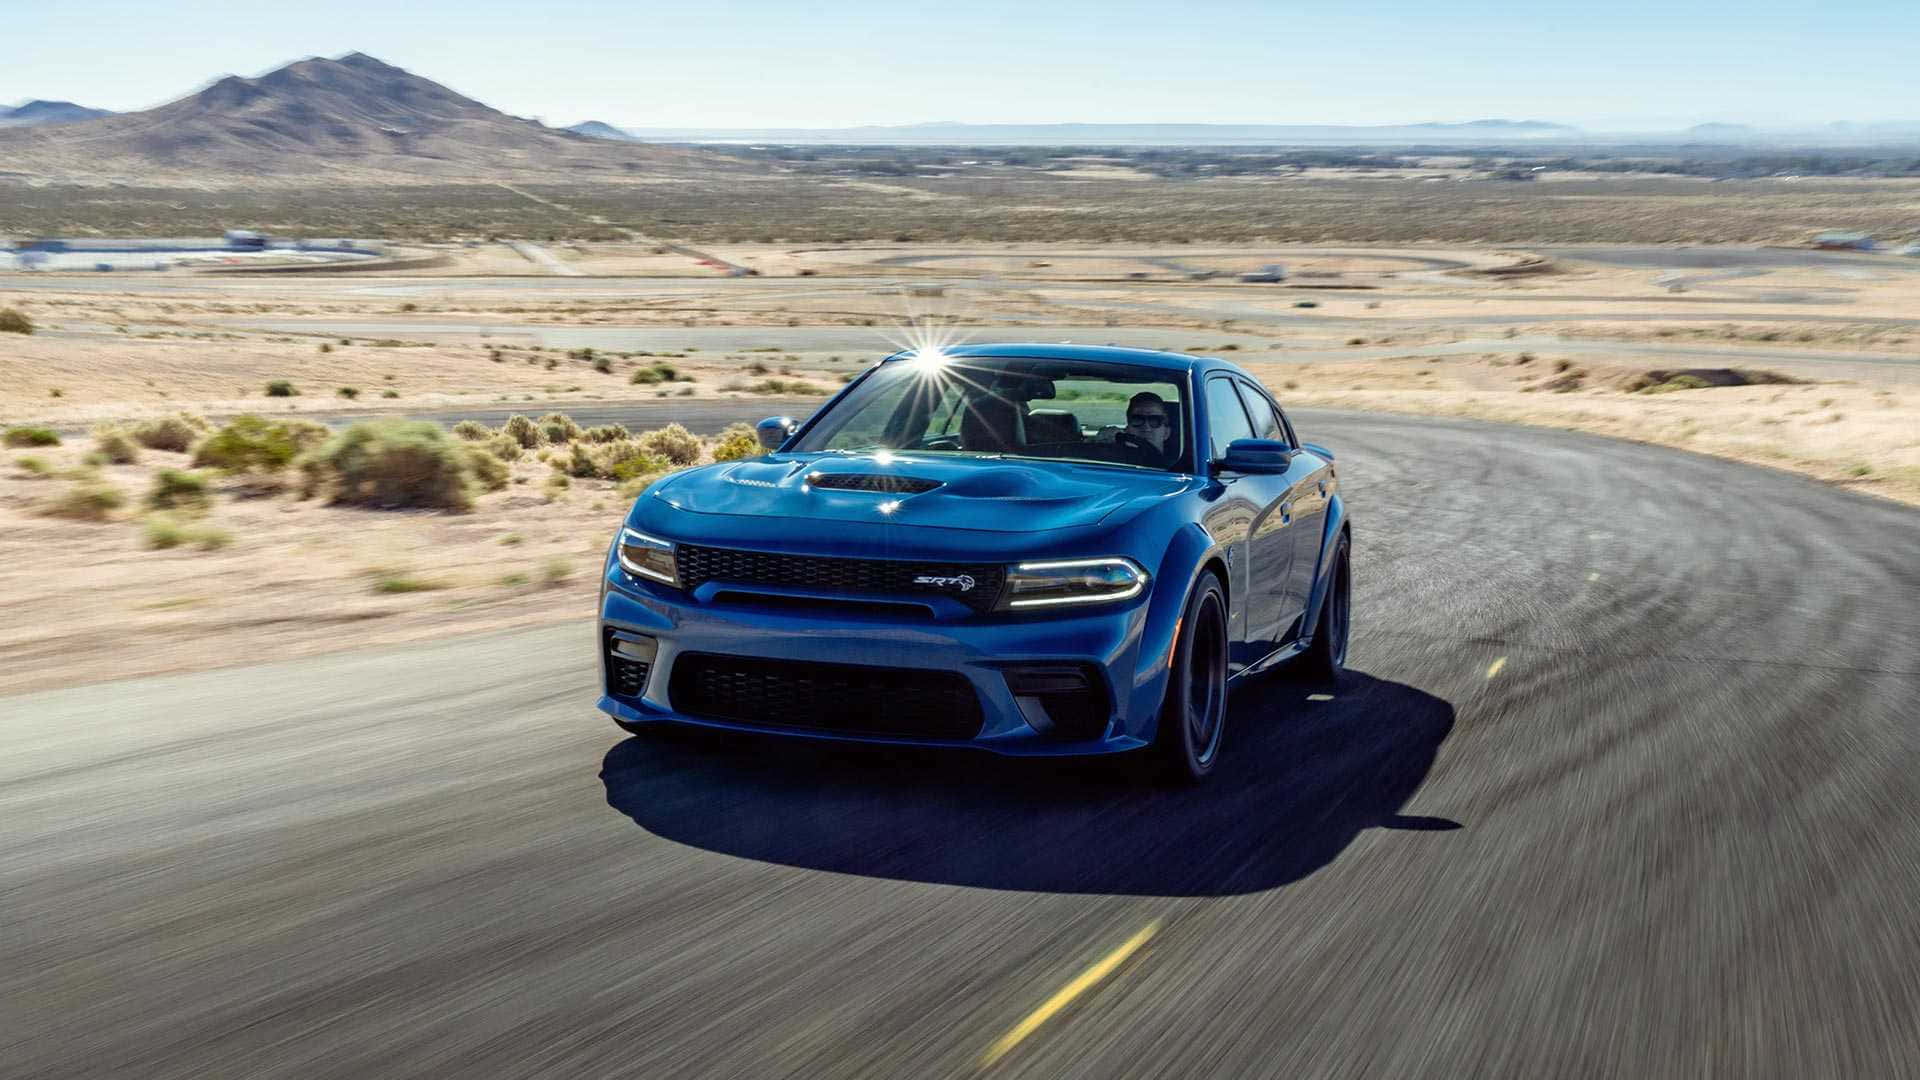 Stunning Dodge Charger on the Road Wallpaper